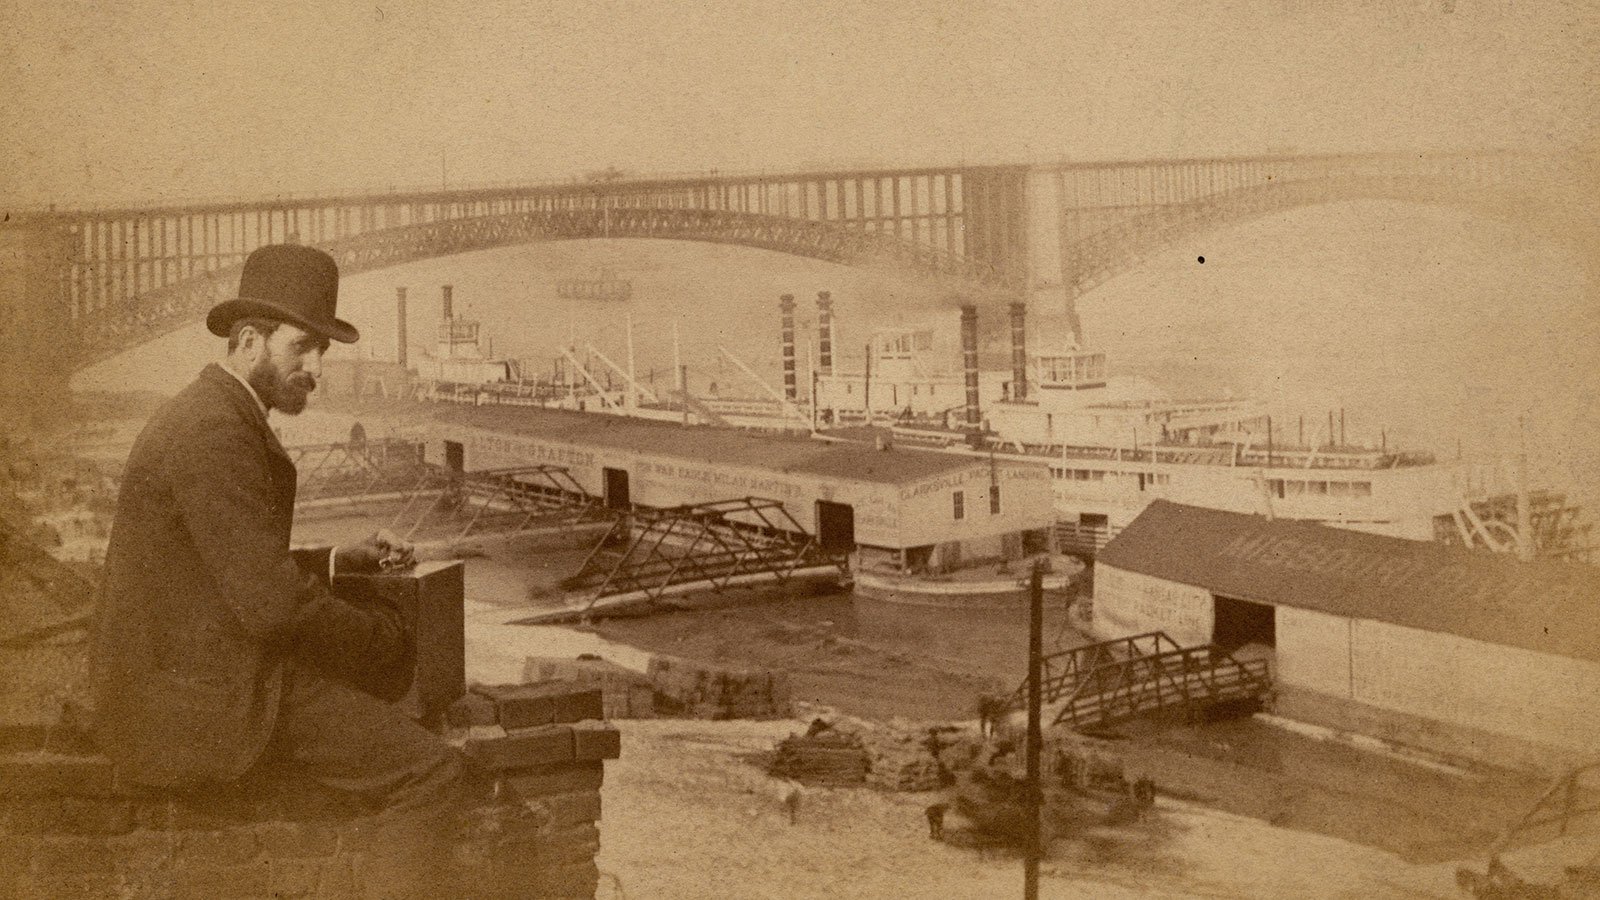 River traffic at the Eads Bridge, with Professor William Butler in the foreground